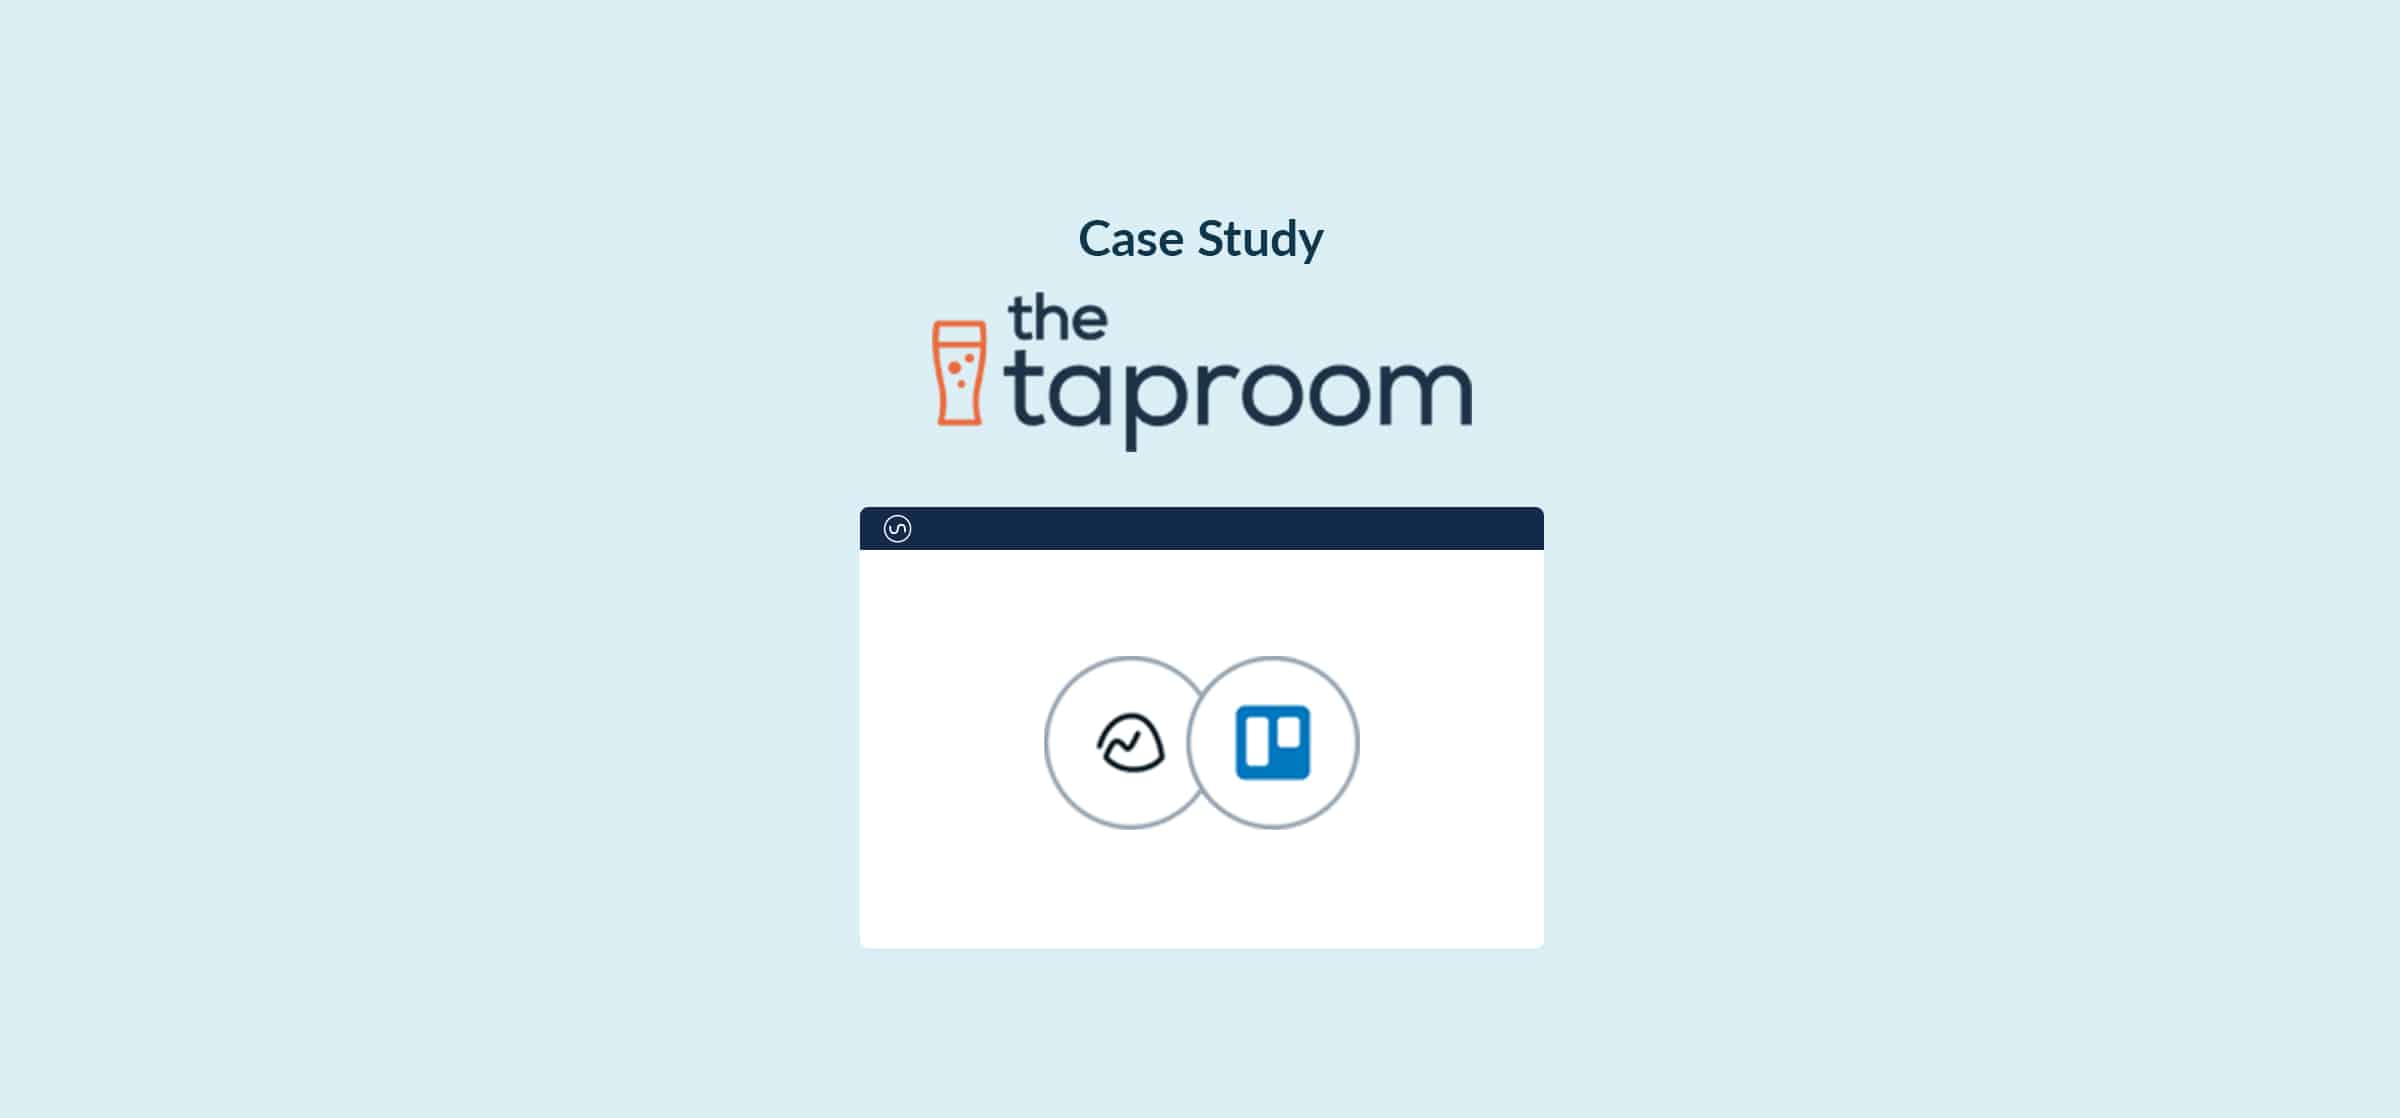 Logos for Basecamp, Trello, and the Taproom, representing their case study